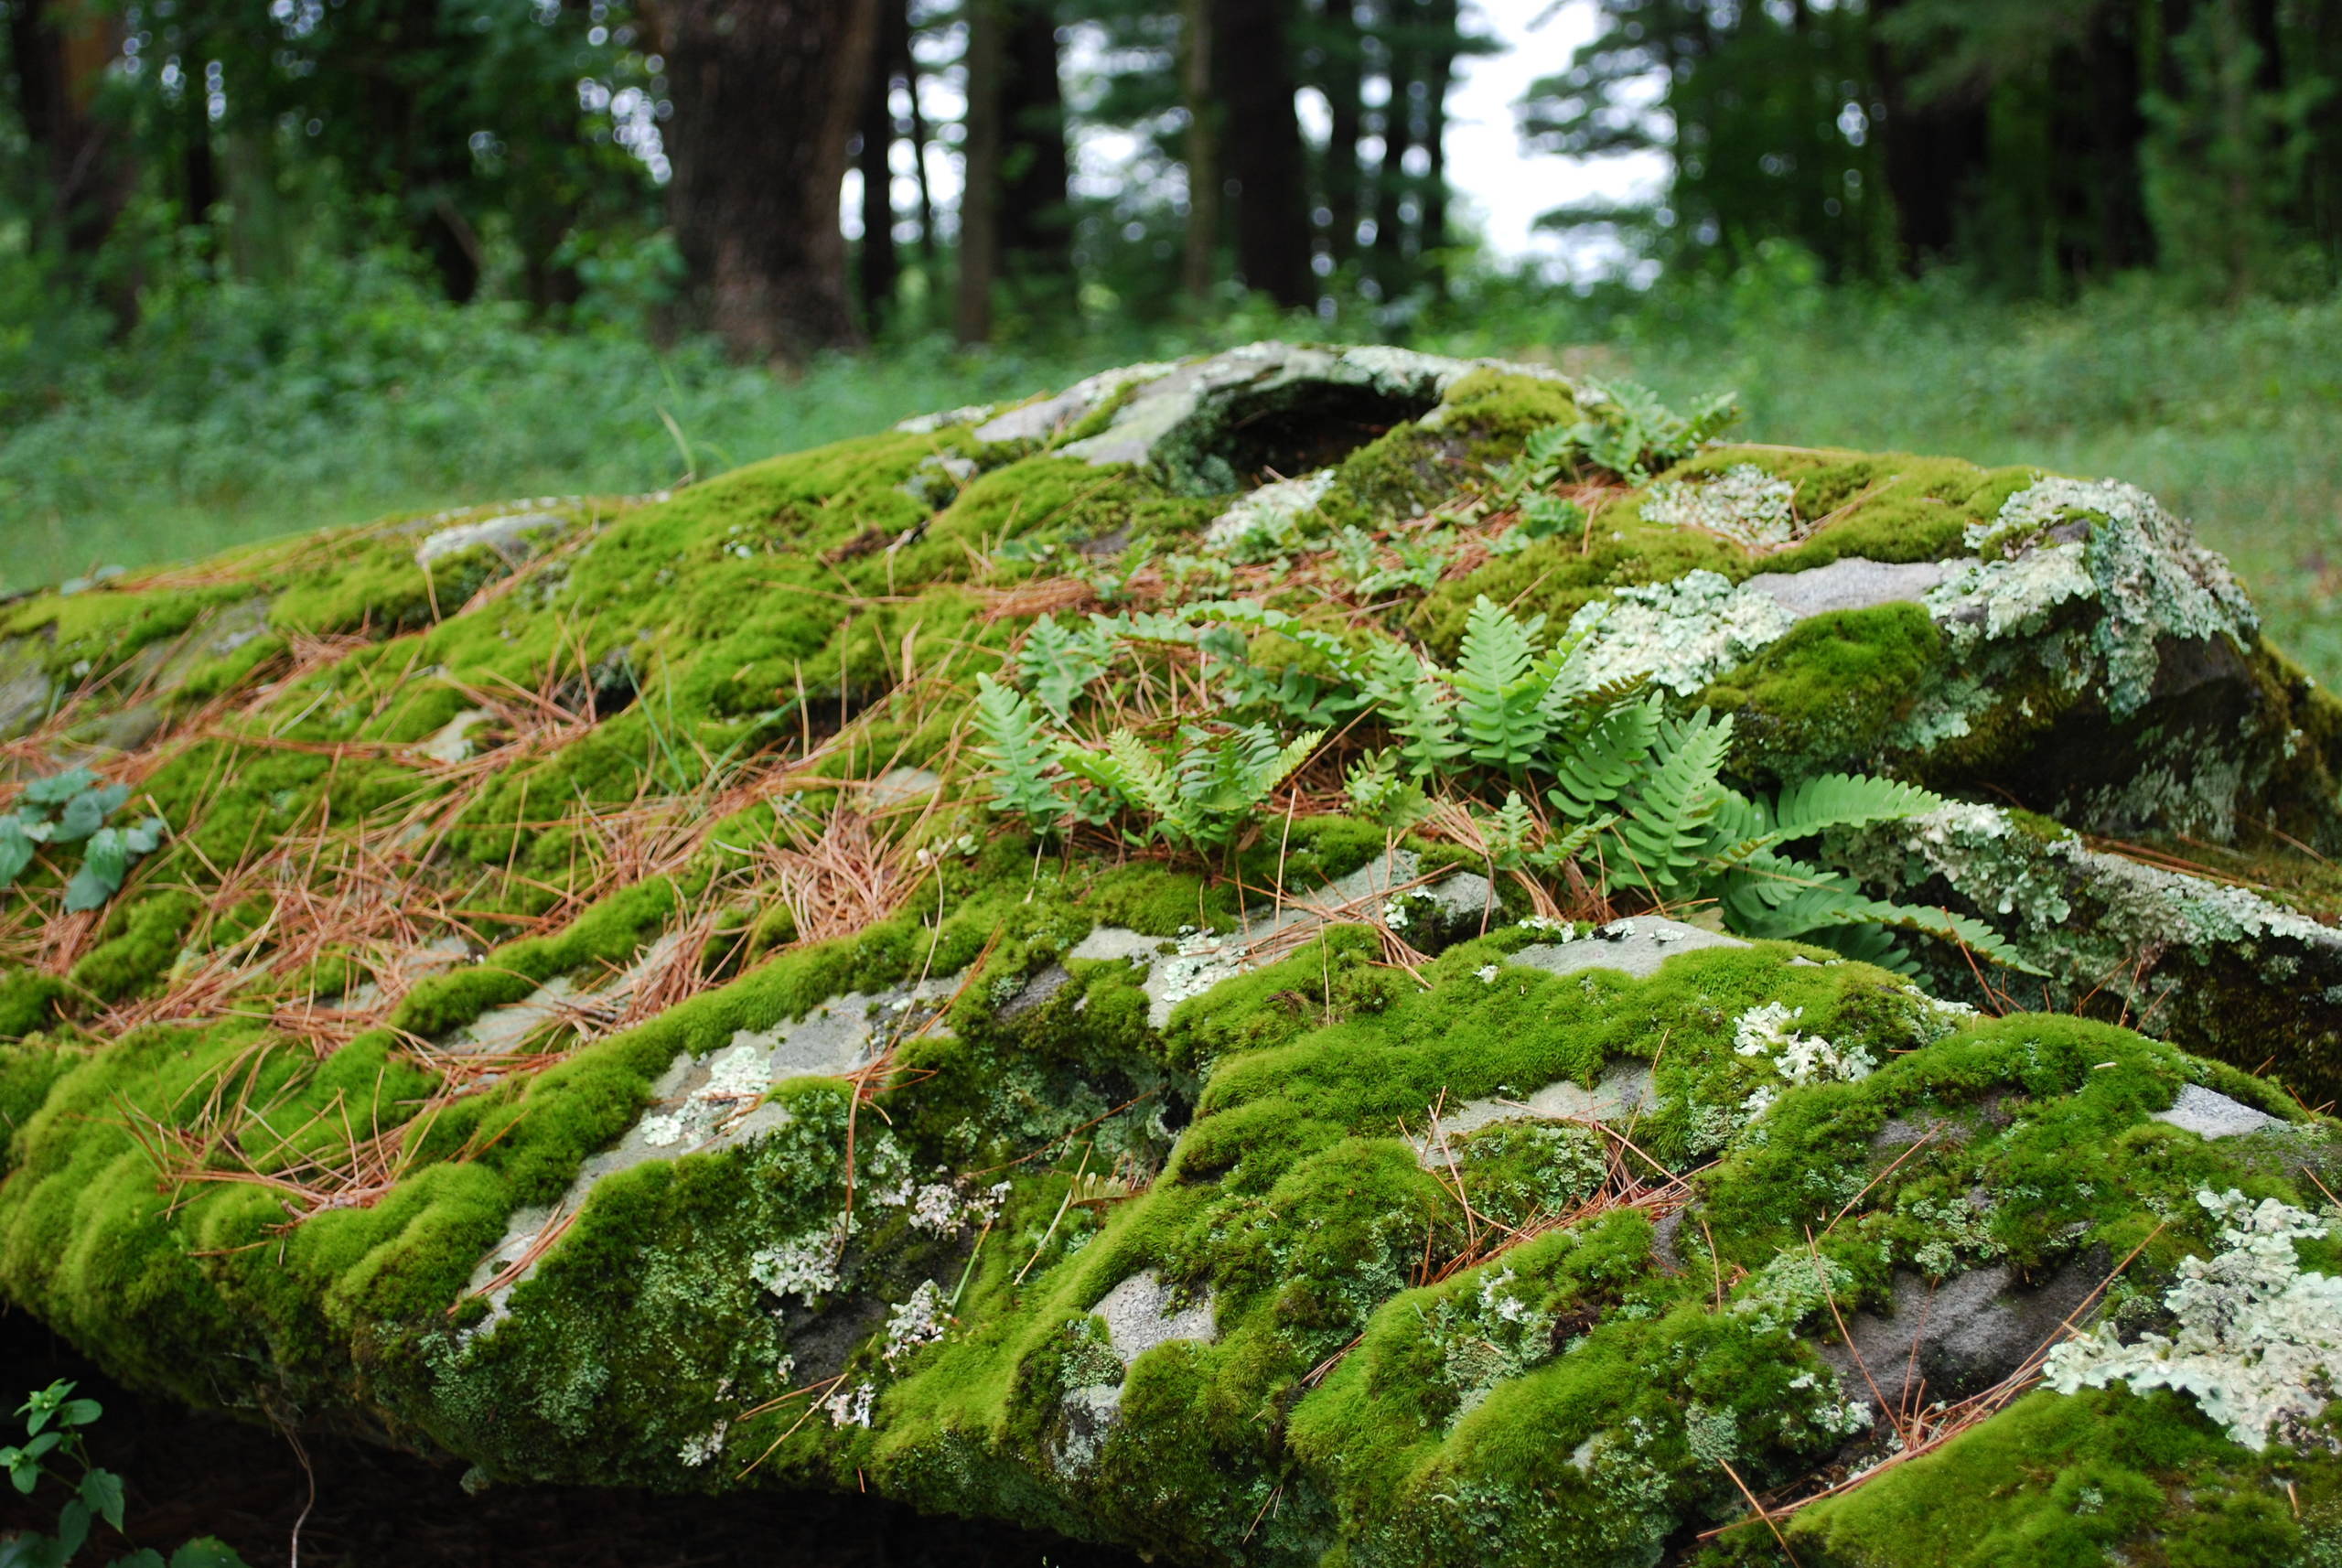 Boulder planted with ferns and moss.